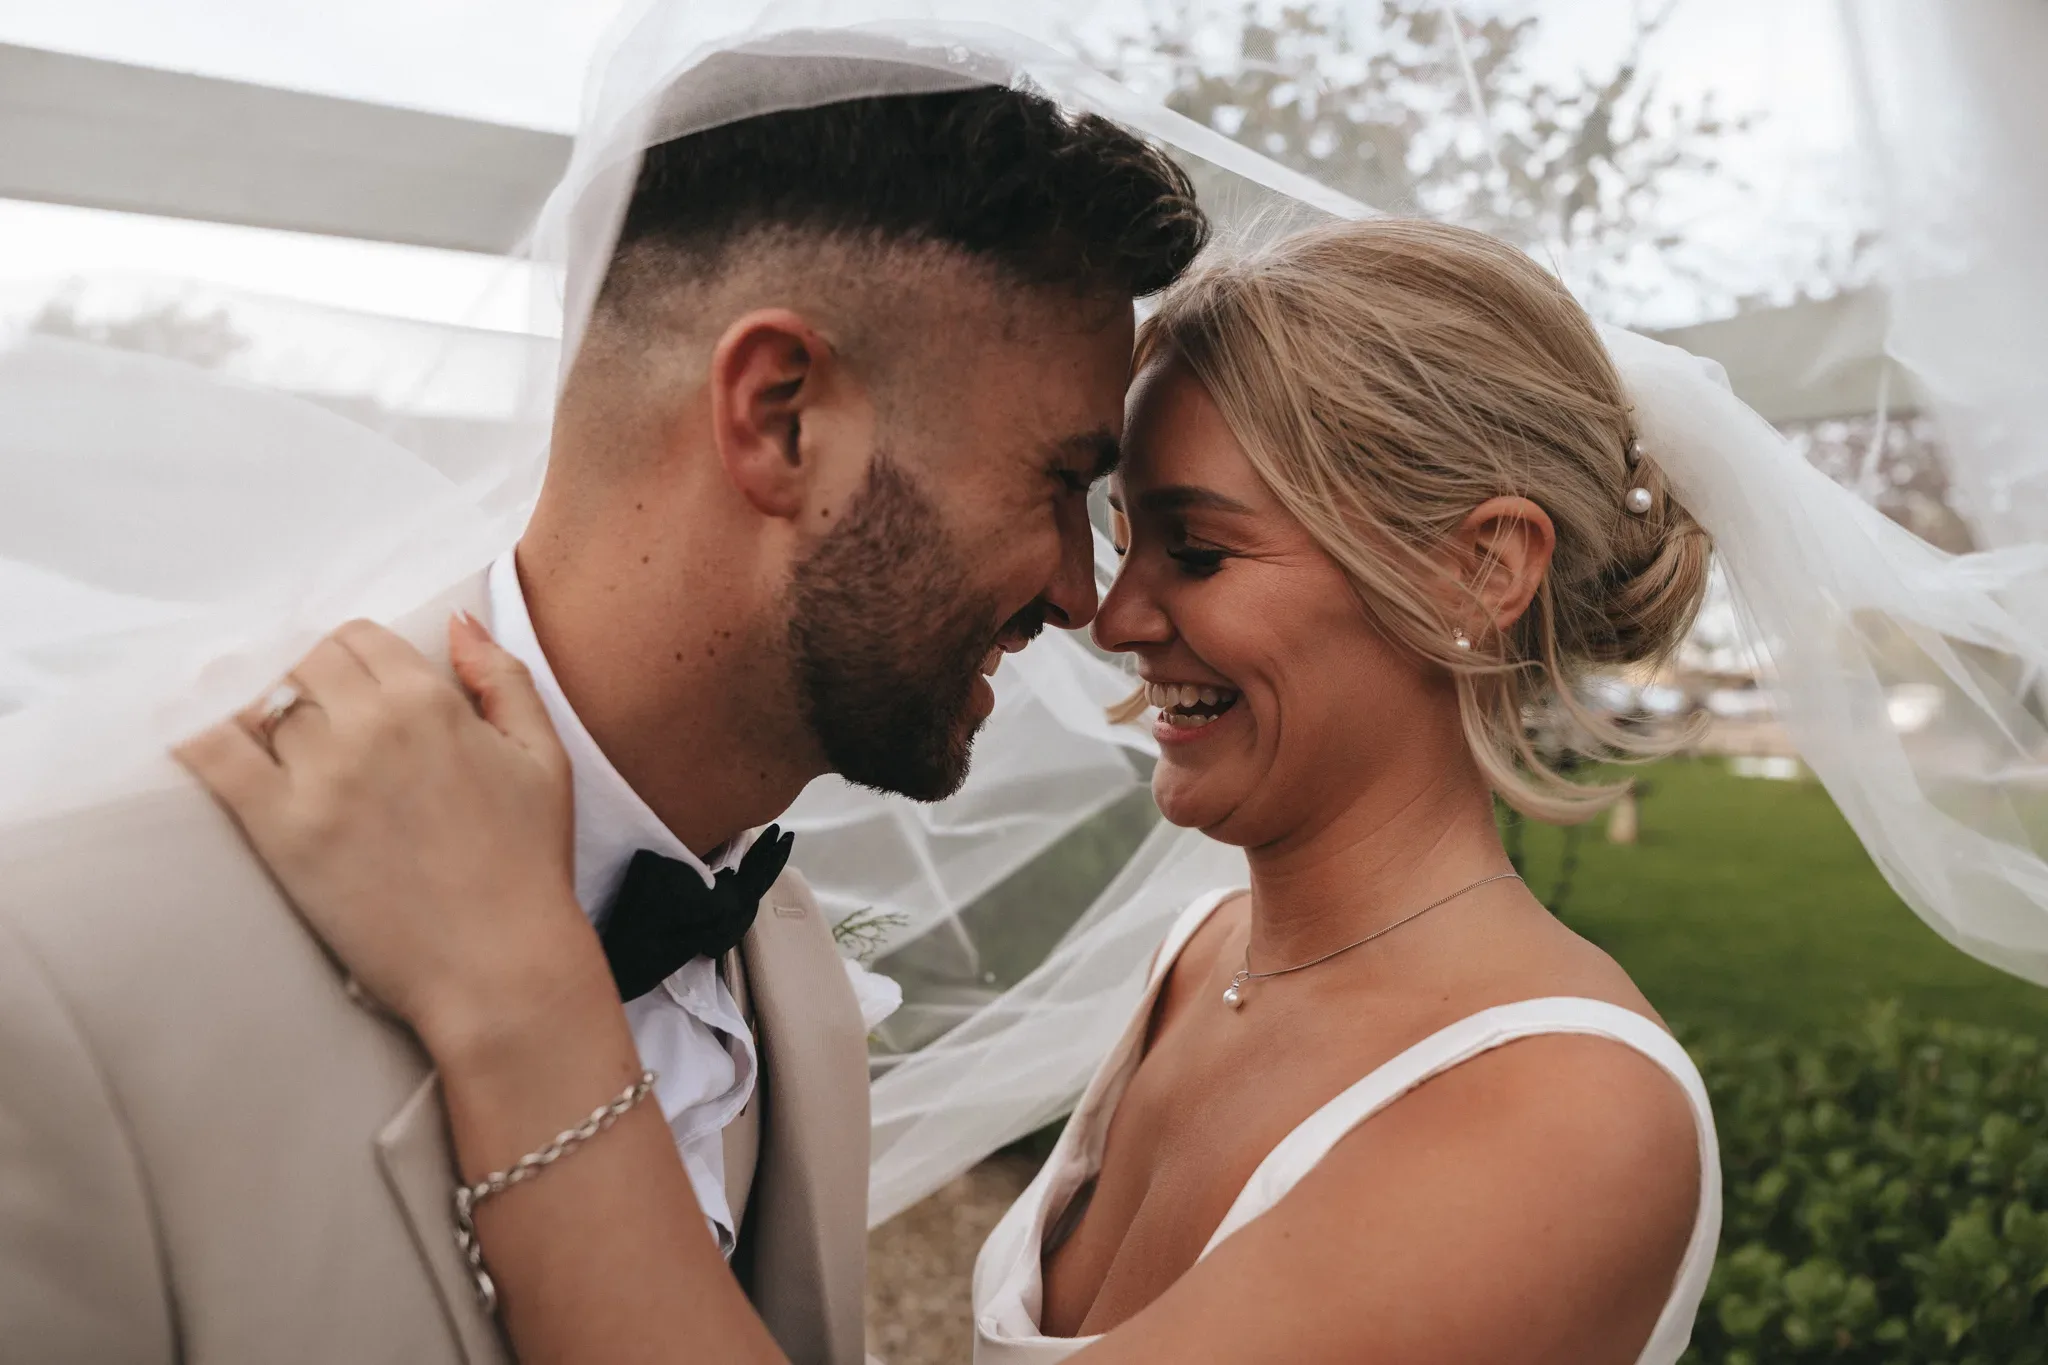 A joyful bride and groom embrace under a sheer veil, their faces close together smiling. the groom is bearded, and the bride has her hair styled up. they are outdoors, with soft, blurred greenery in the background.